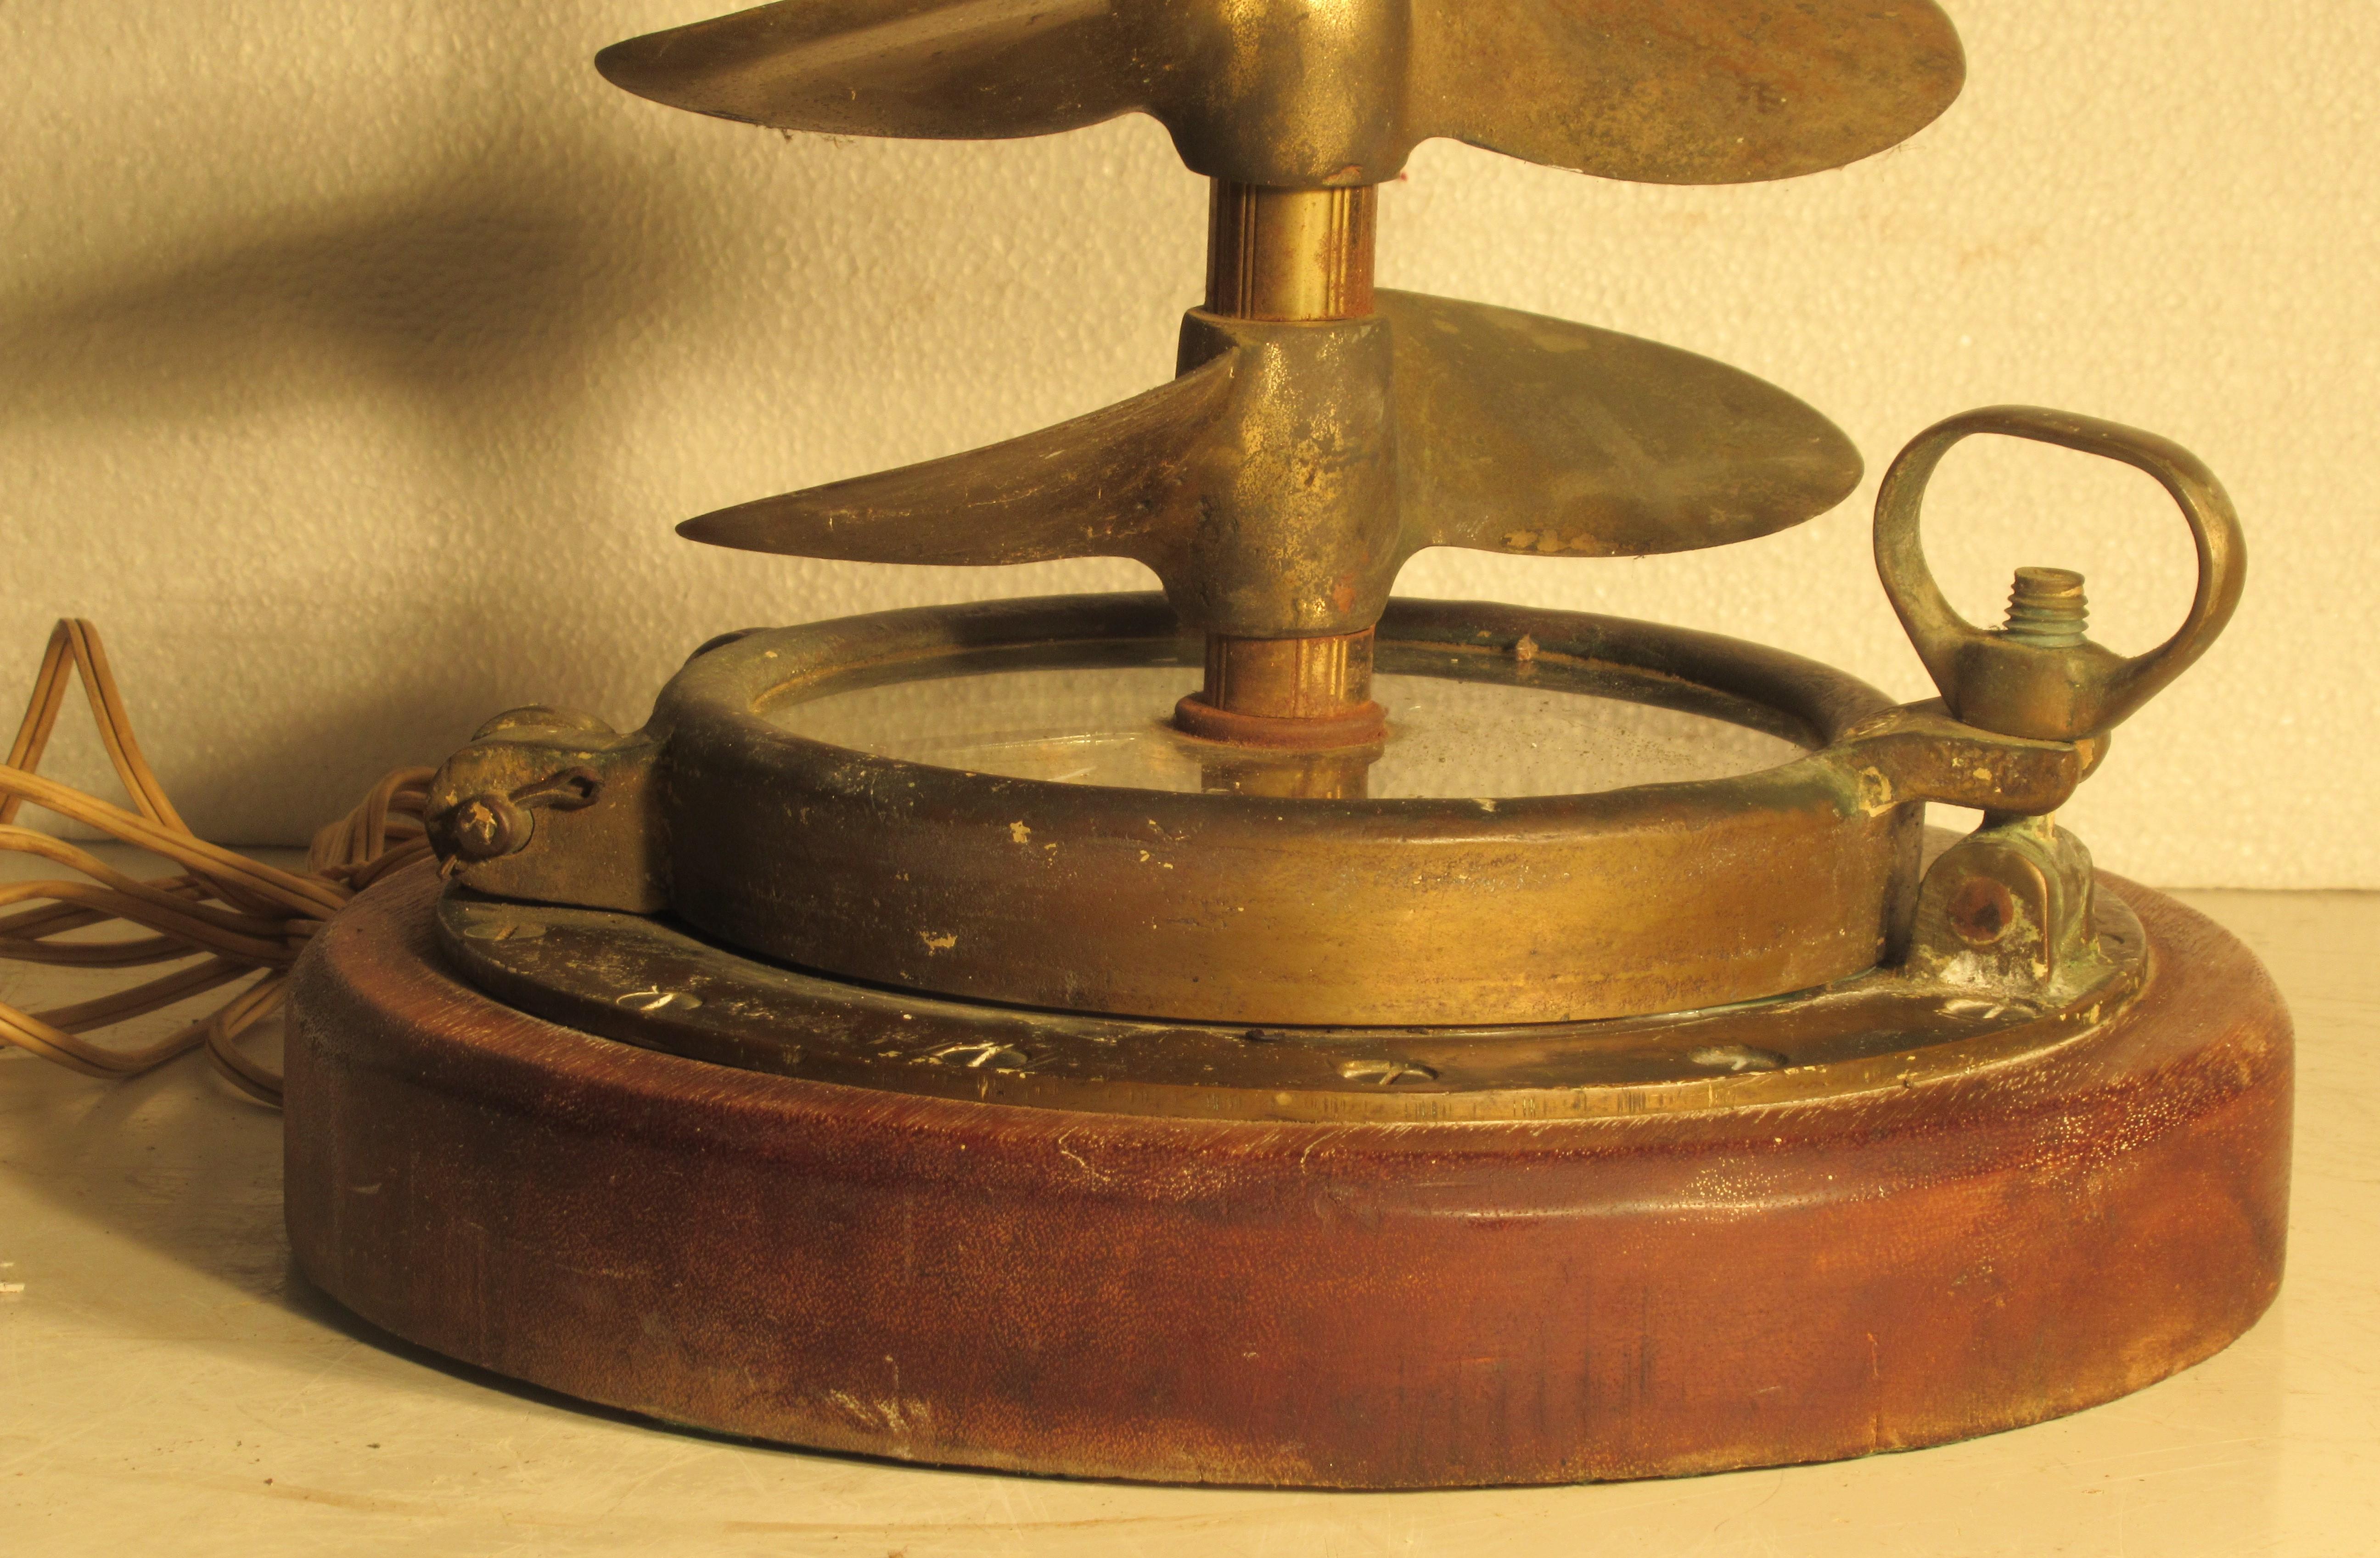  Custom Antique Nautical Theme Lamp with Propellers and Porthole 3